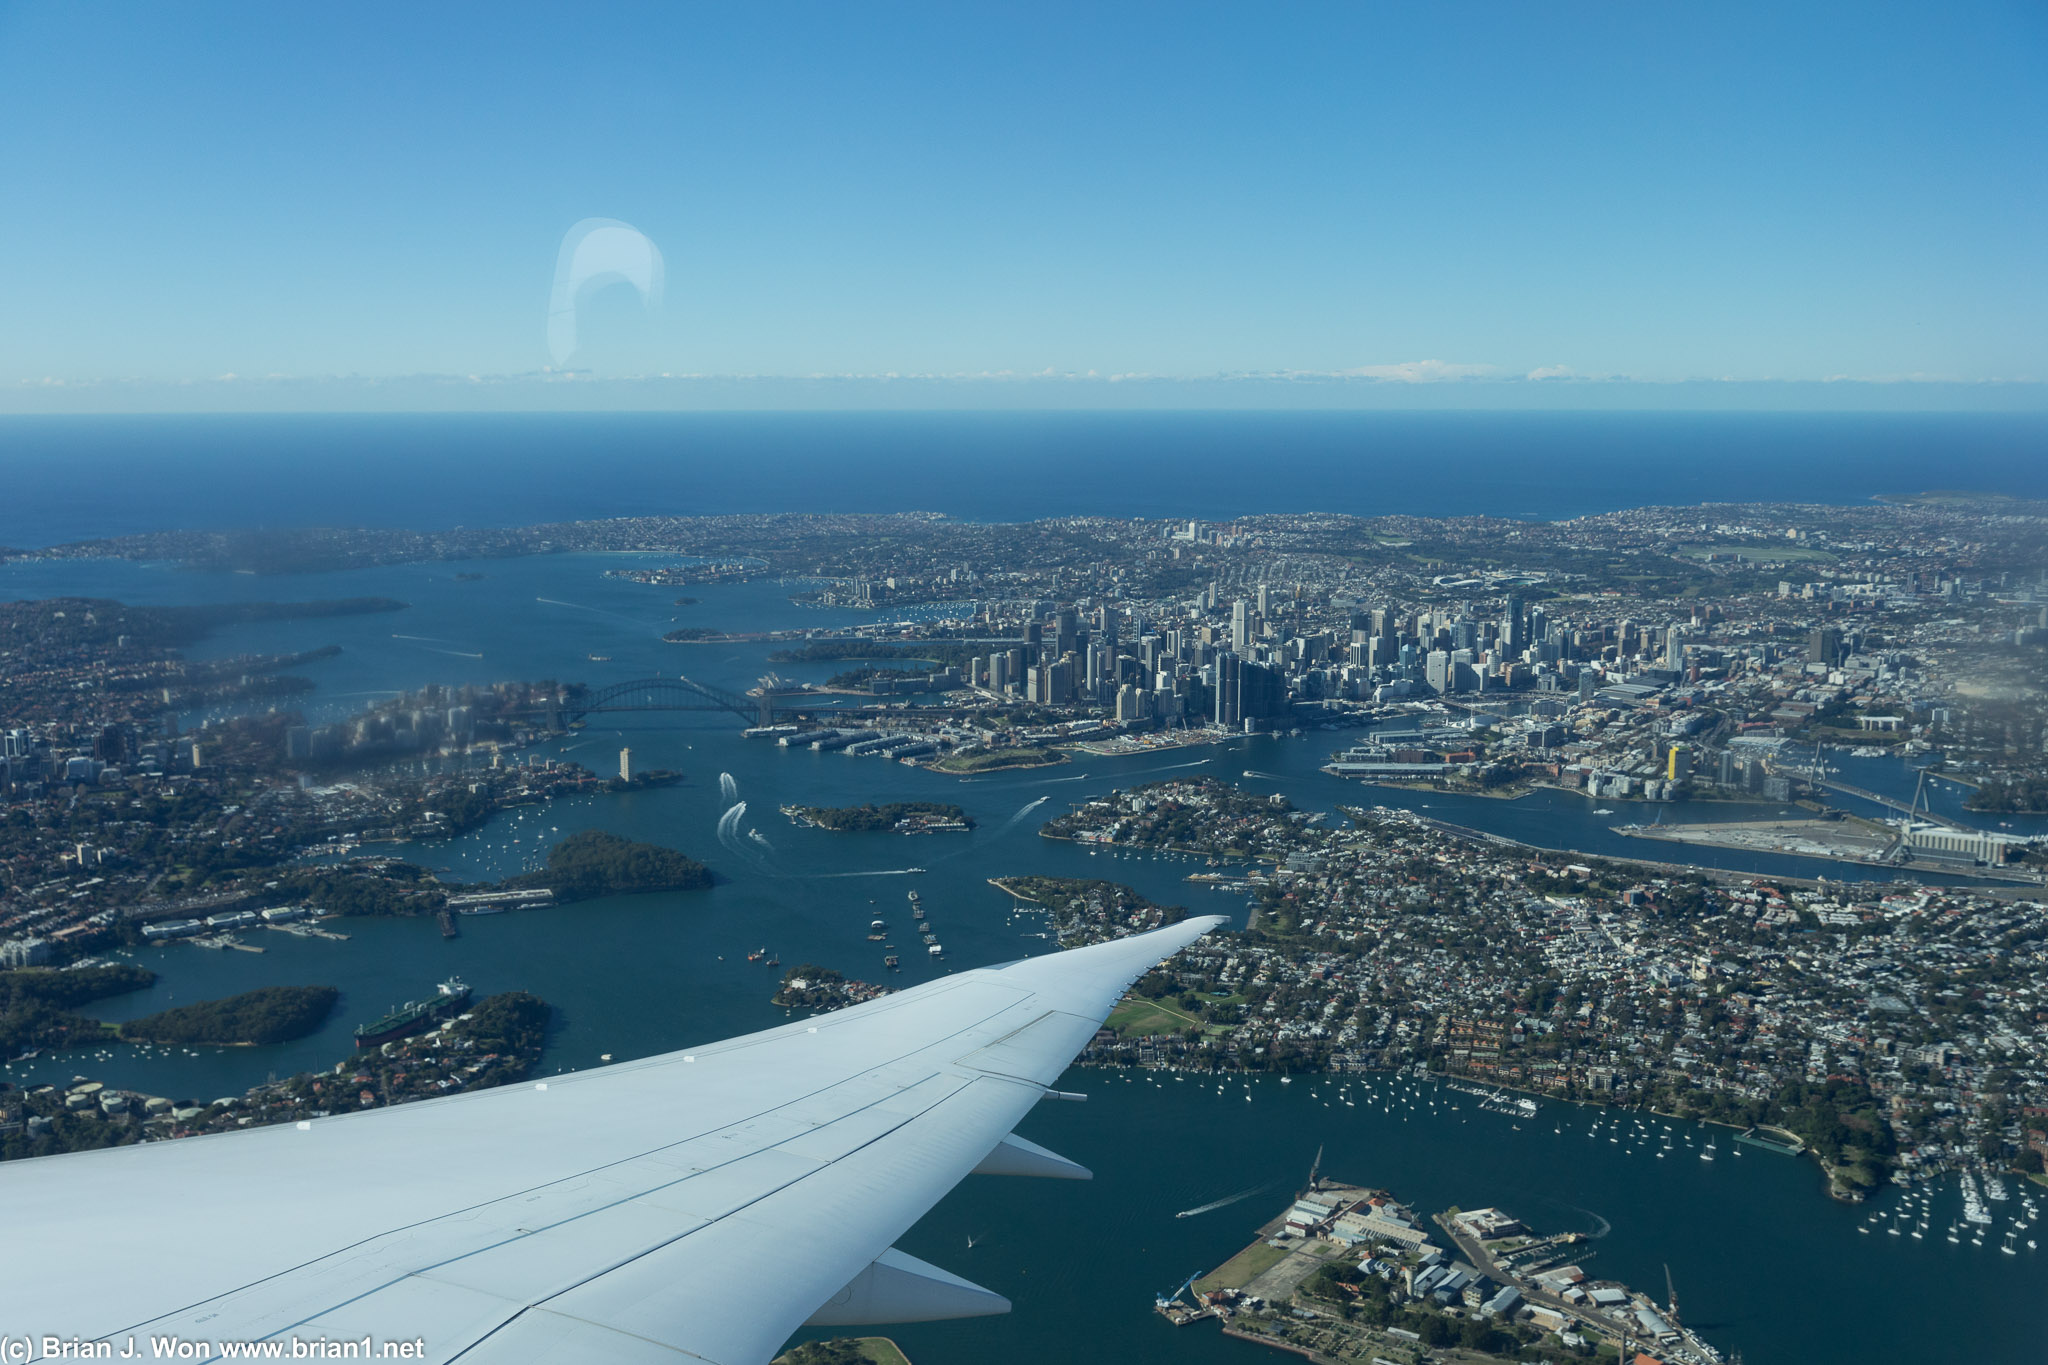 Sydney Harbour from the air. Gorgeous.